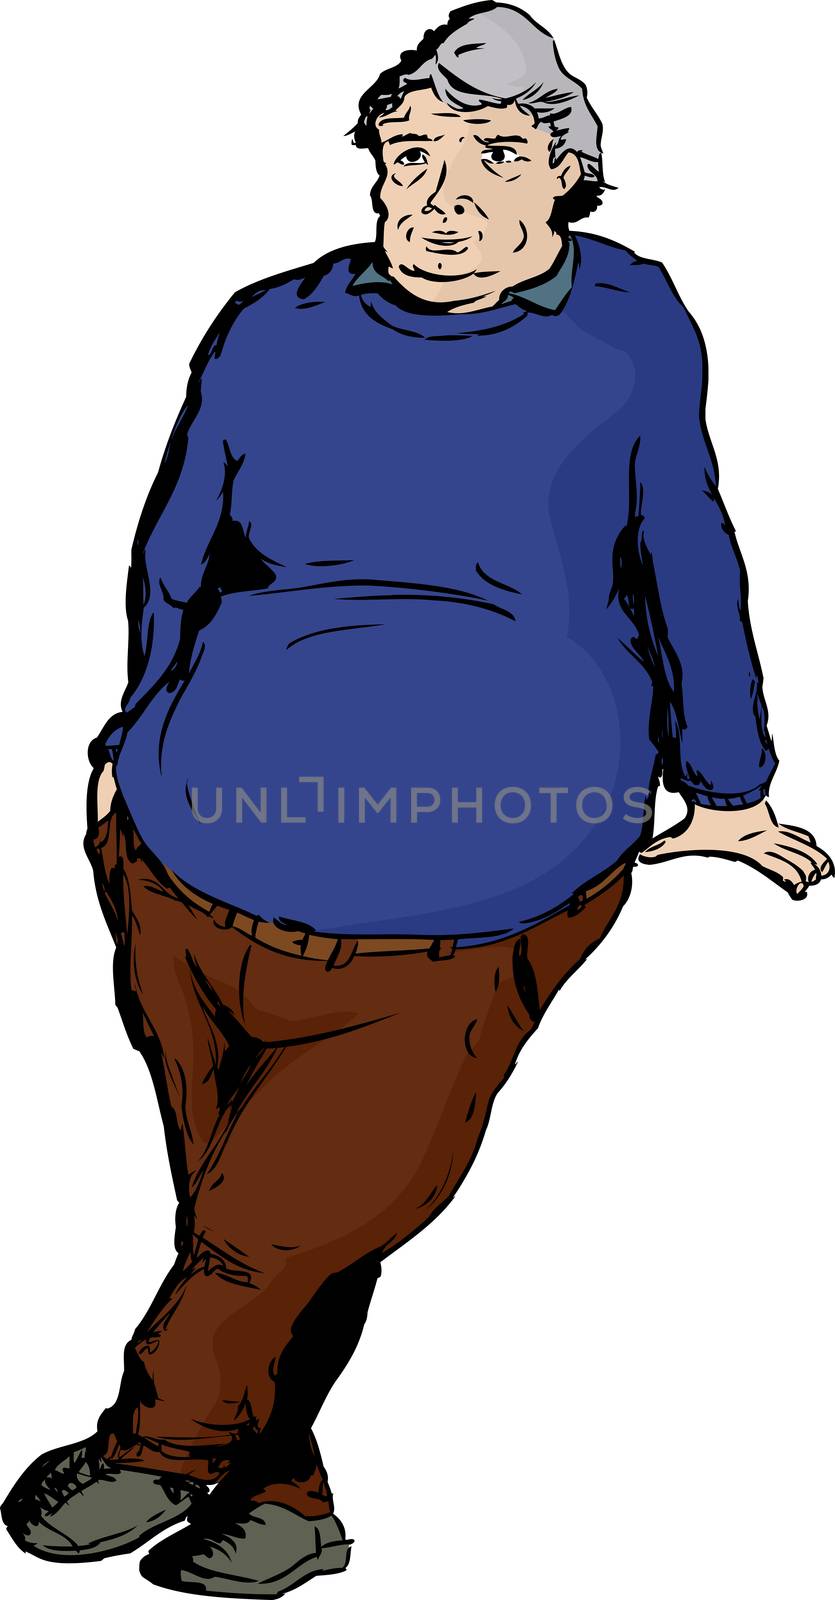 One mature overweight man with big belly leaning over blank area